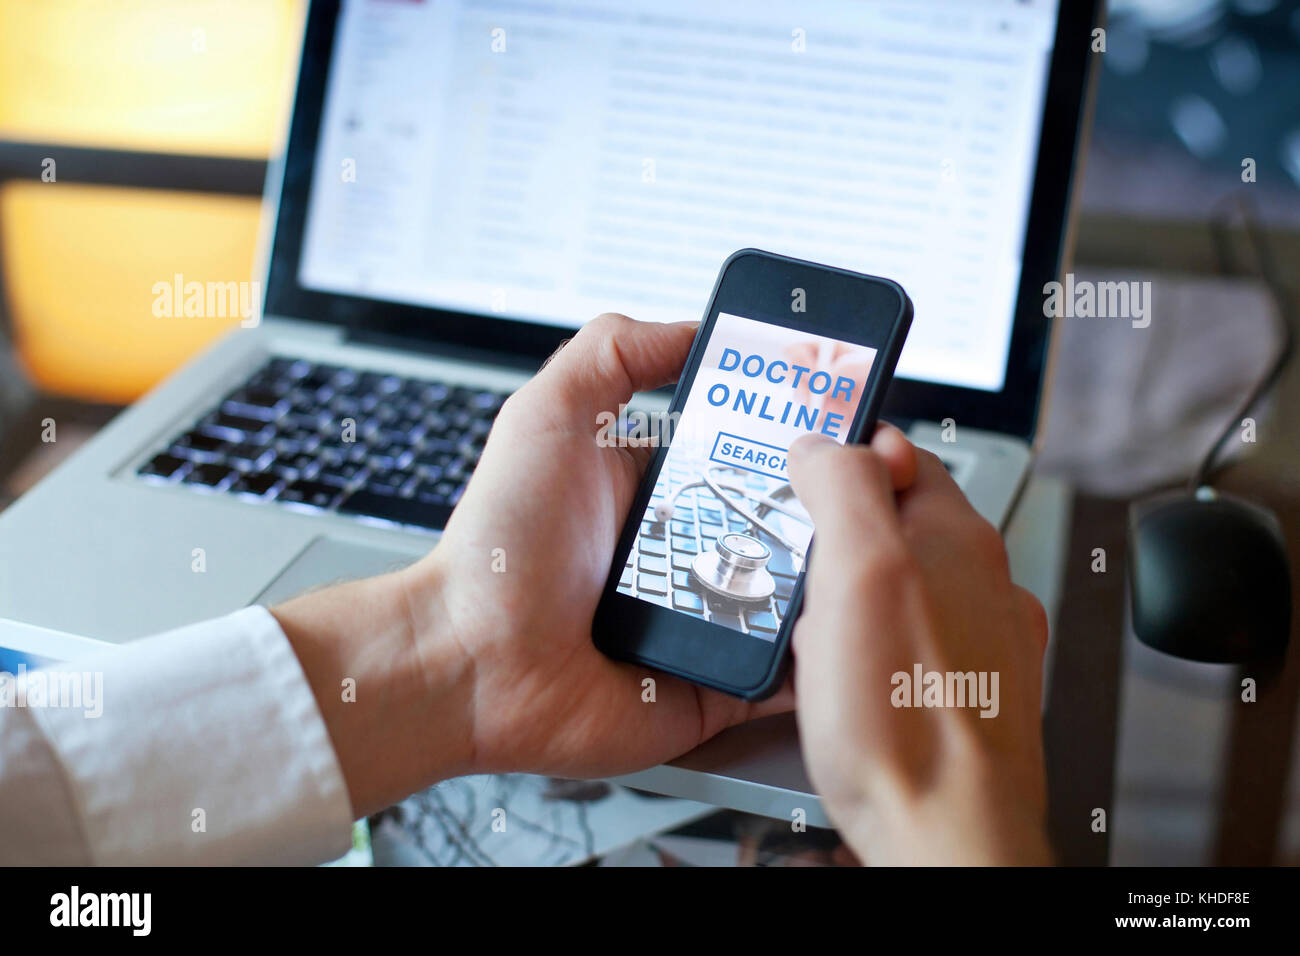 doctor online concept, mobile app for internet medical services on the screen of smartphone Stock Photo